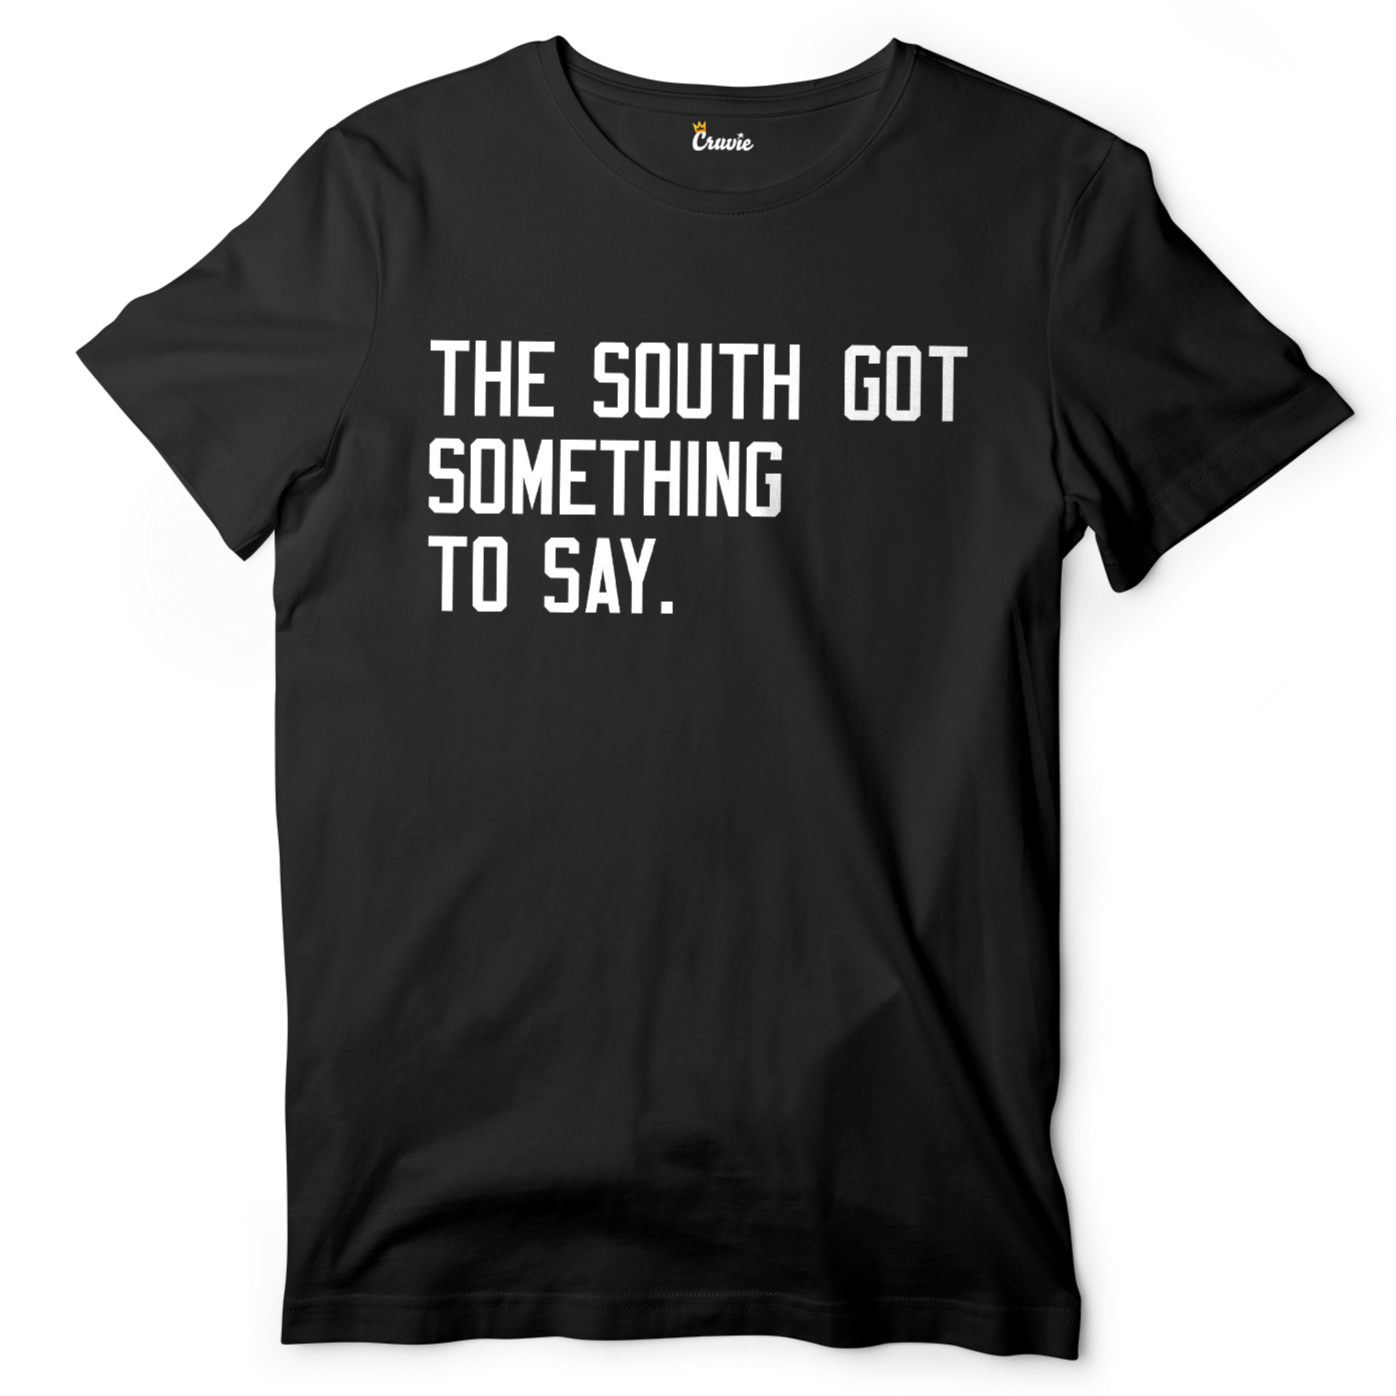 The South Got Something to Say. | Cruvie